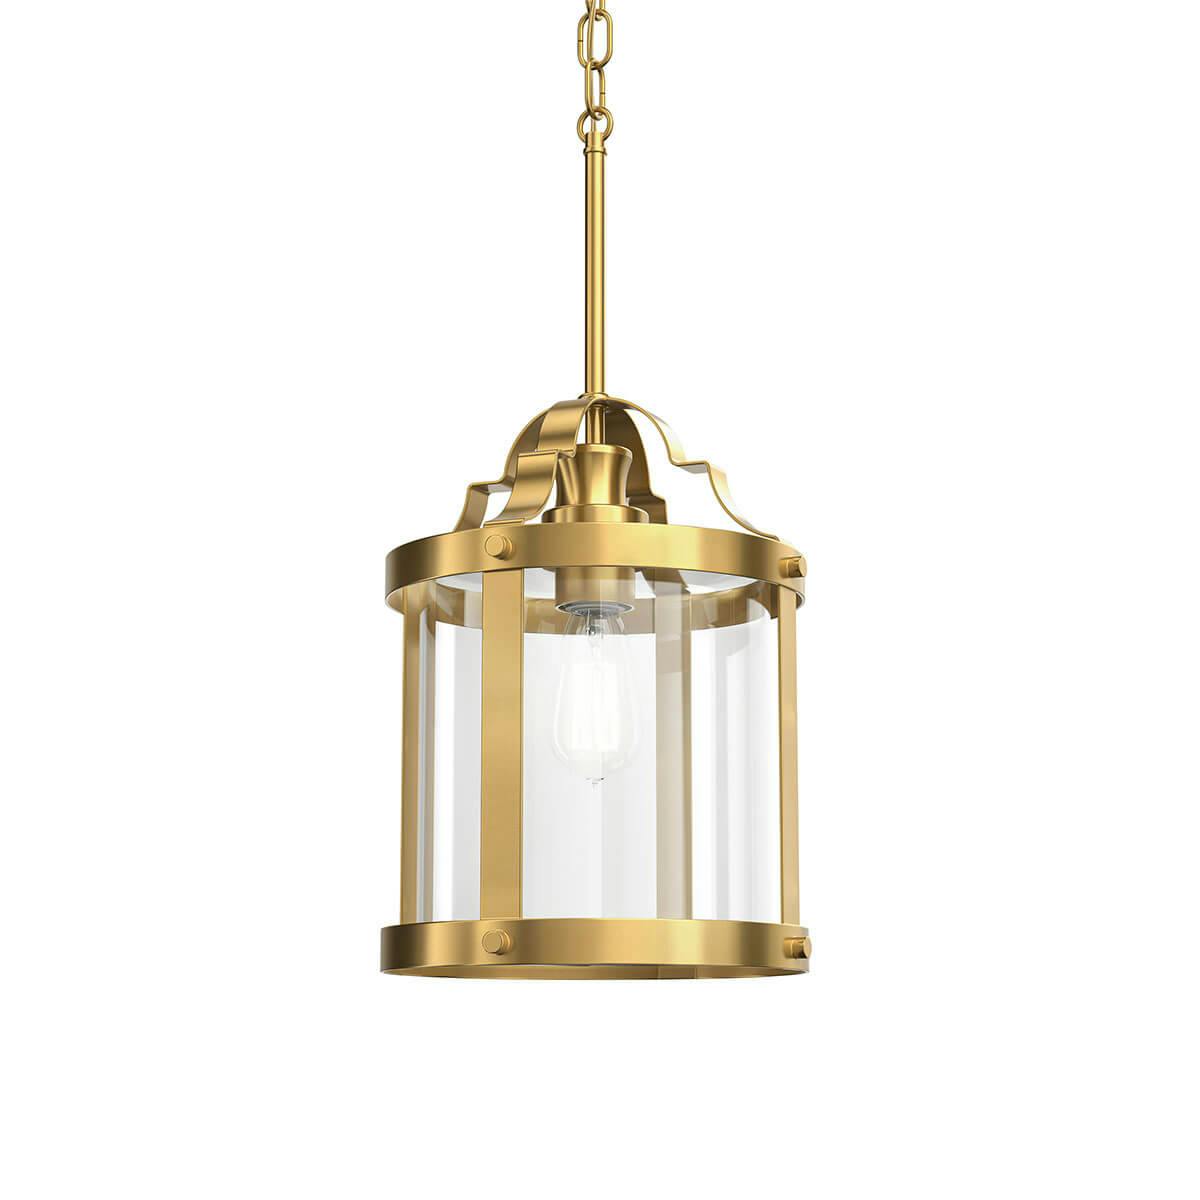 Farona 10.5" 1 Light Pendant Classic Gold without the canopy on a white background